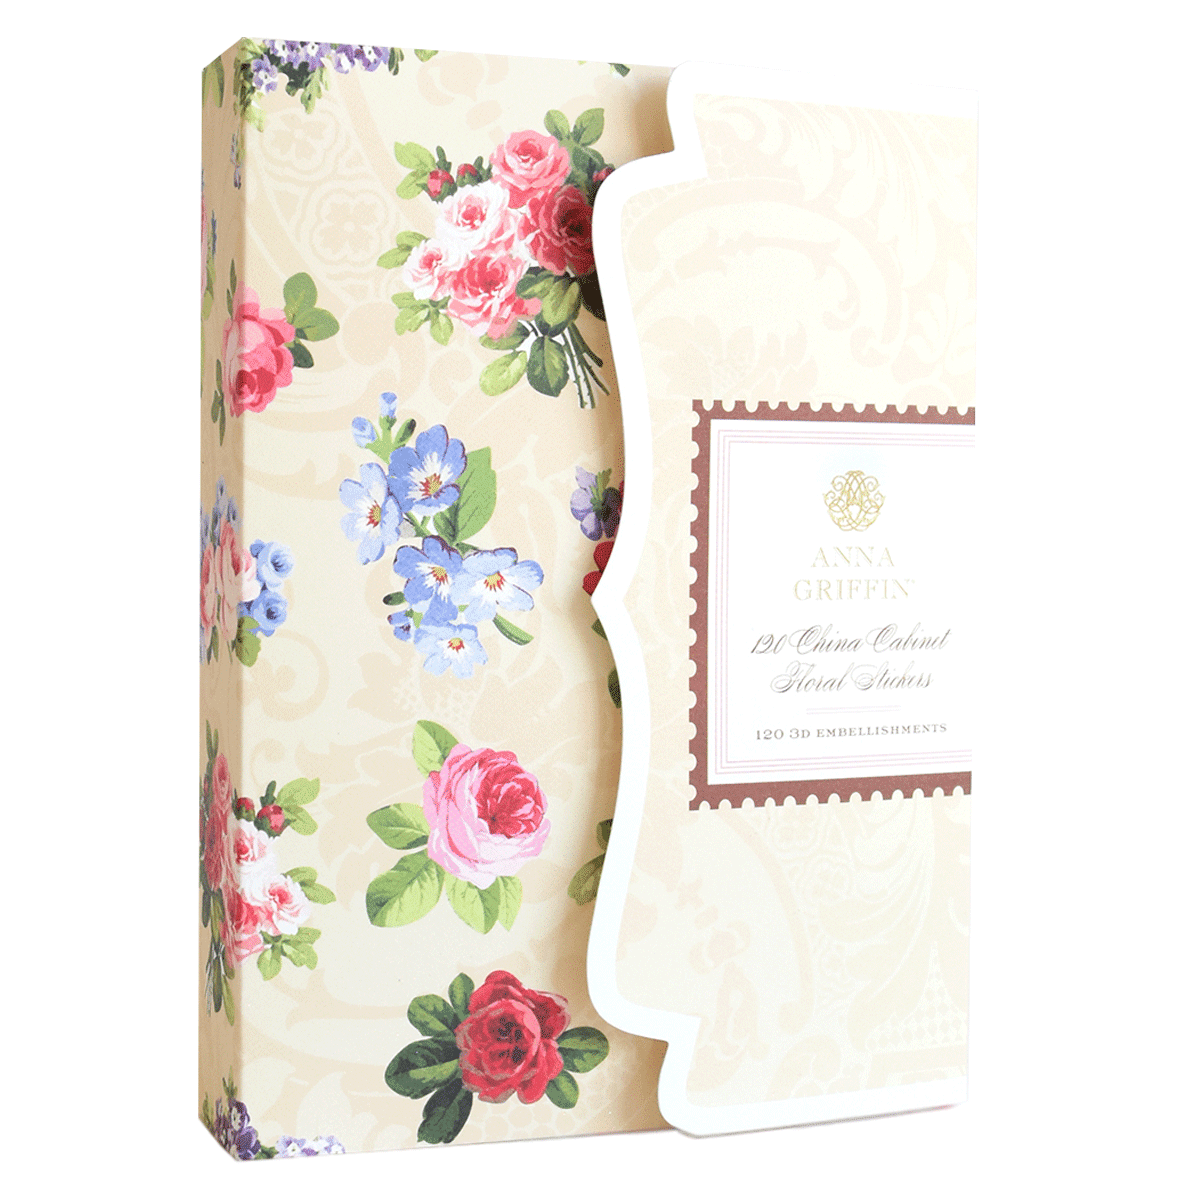 a book with a floral design on it.